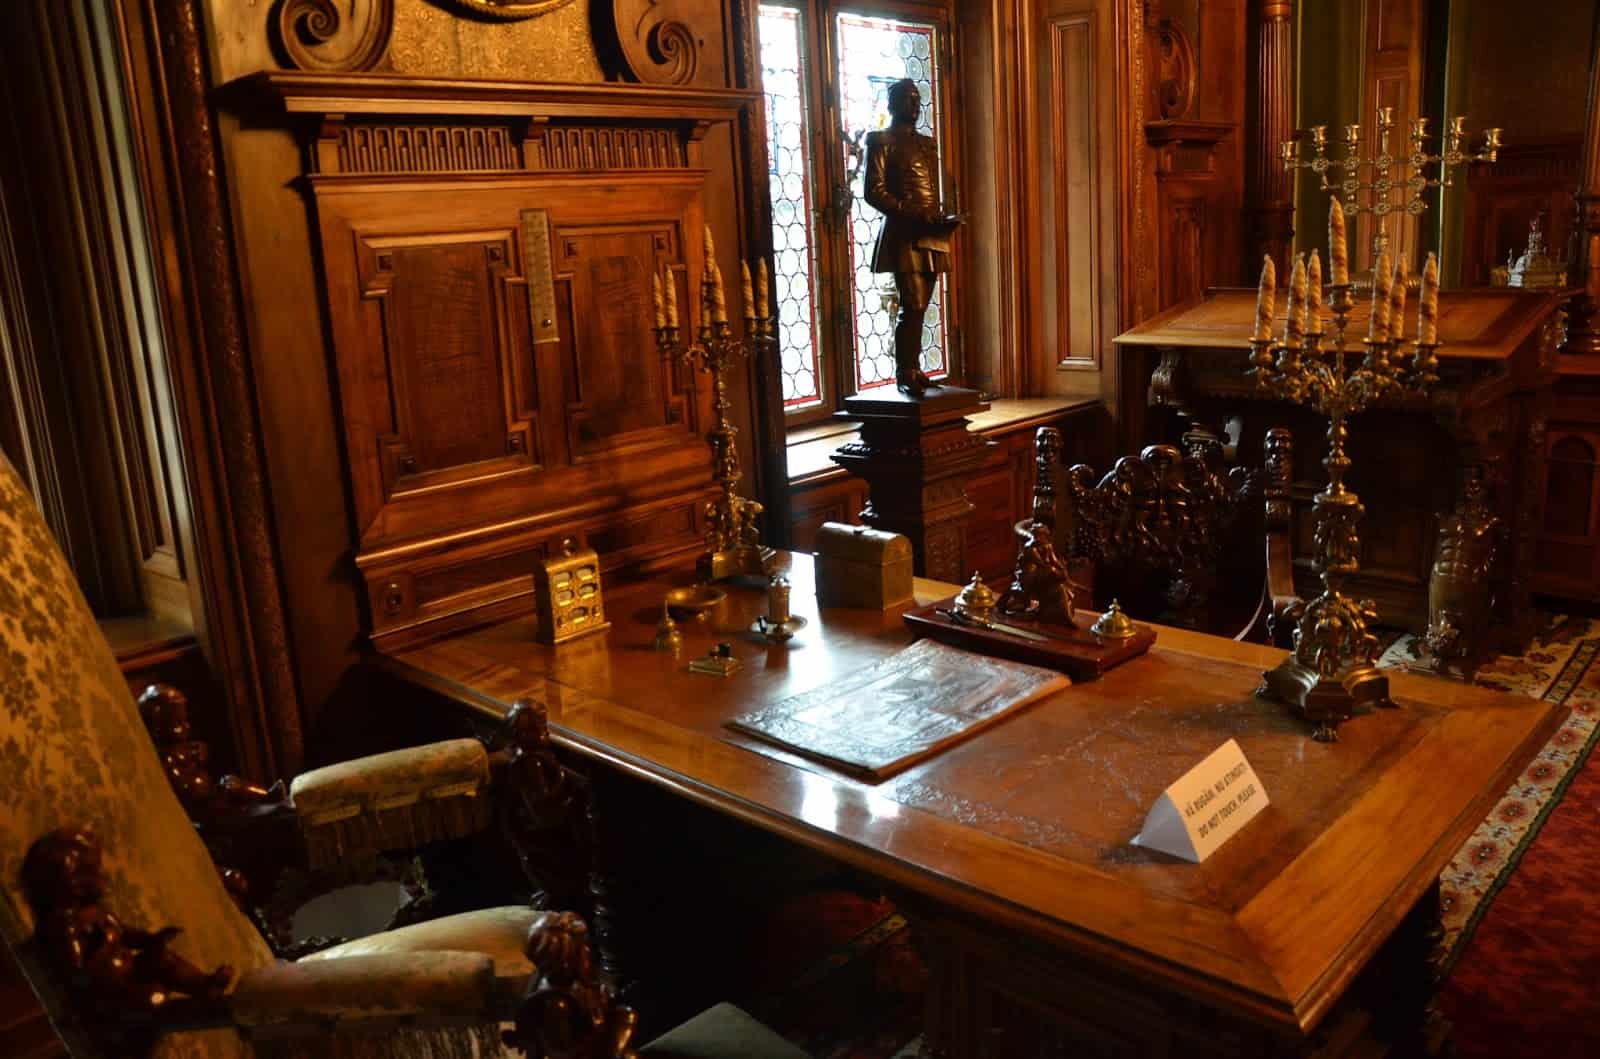 King's office at Peleș Castle in Sinaia, Romania